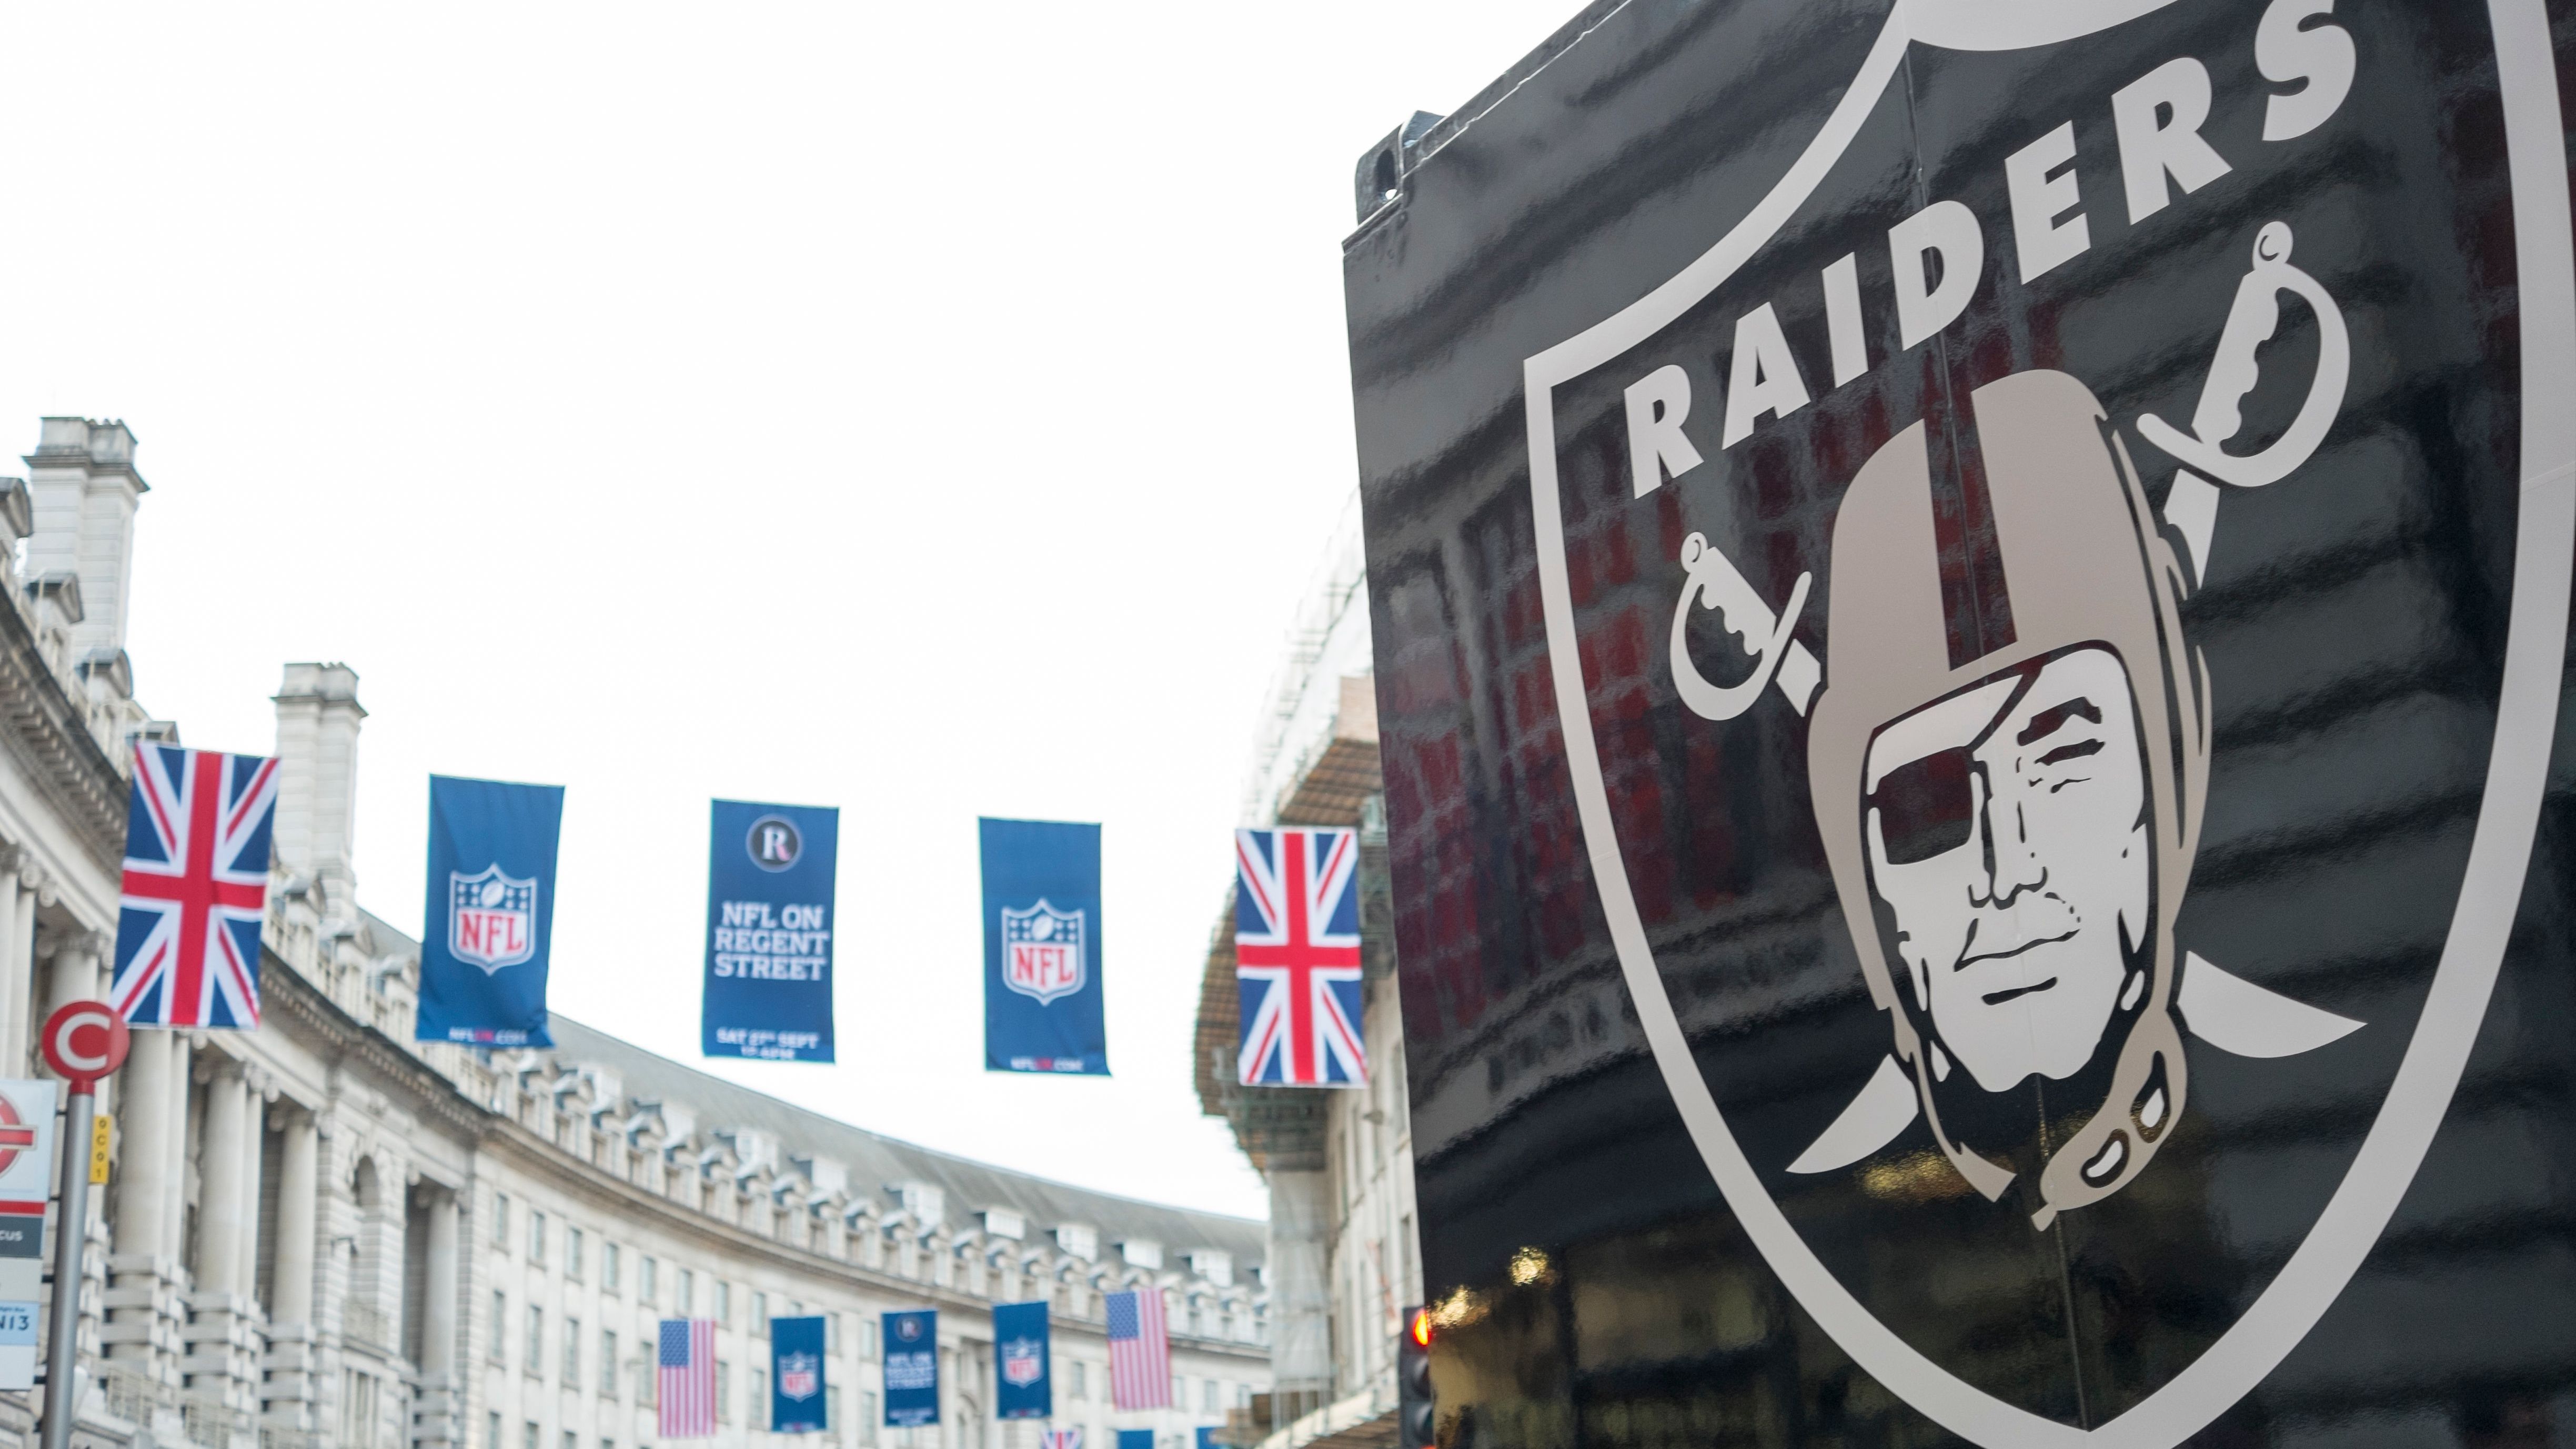 <strong>Oakland / Las Vegas Raiders (5 Spiele im Ausland)</strong><br>- Spiele in London: 3 (2014; 14:38 vs. Miami Dolphins / 2018; 3:27 vs. Seattle Seahawks / 2019; 24:21 vs. Chicago Bears)<br>- Spiele in Mexiko: 2 (2016; 27:20 vs. Houston Texans / 2017; 8:33 vs. New England Patriots)<br>- Spiele in Deutschland: -<br>- Spiele in Brasilien: -